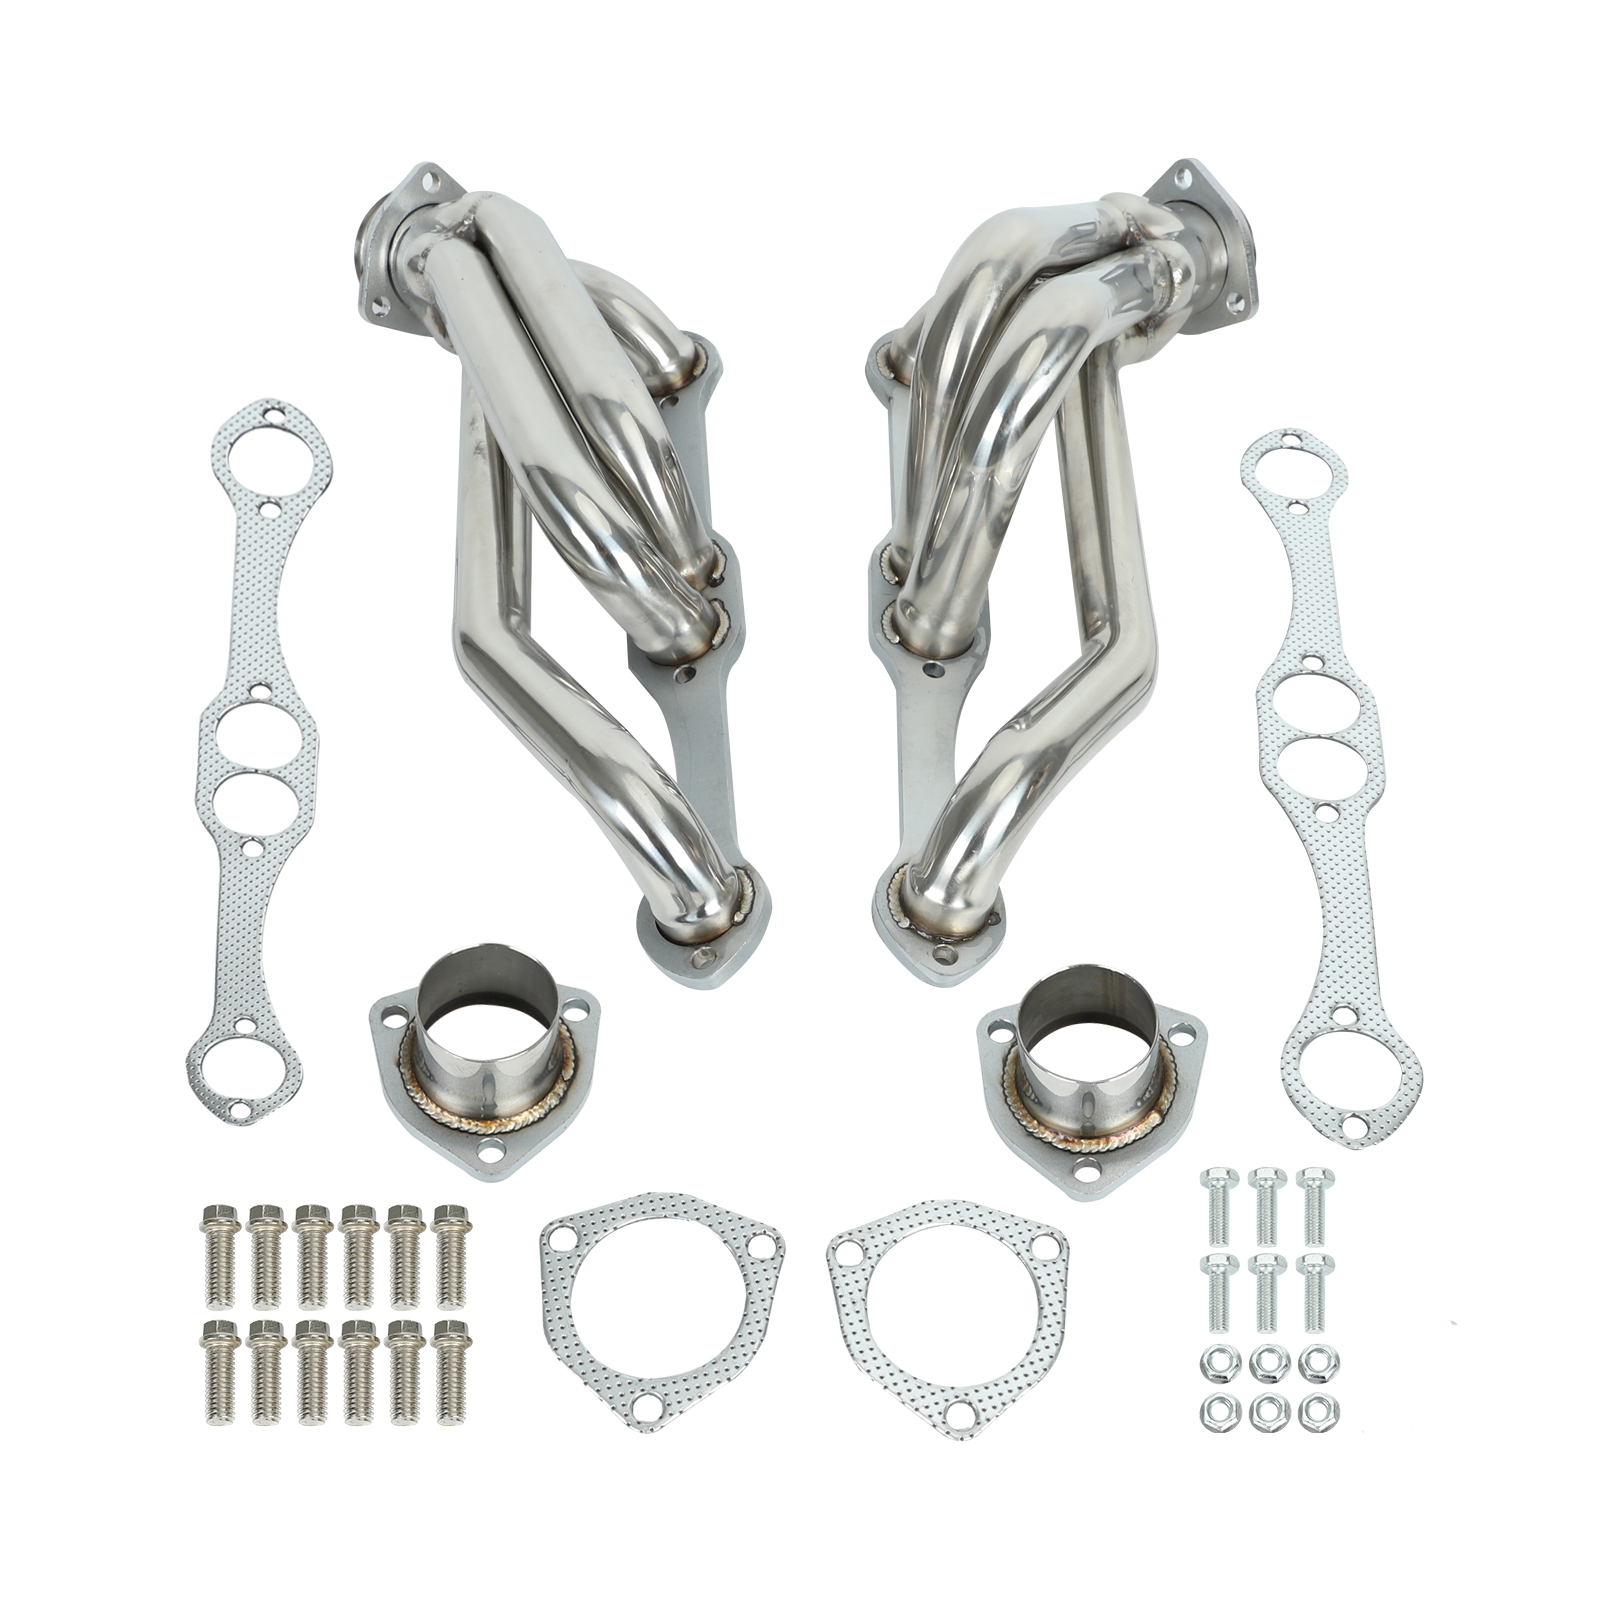 OEM EGR Delelet Kit Manufacturers –  Engine Swap Exhaust Headers for Small Block Chevy Blazer S10 S15 283 302 350 V8 – Yibai